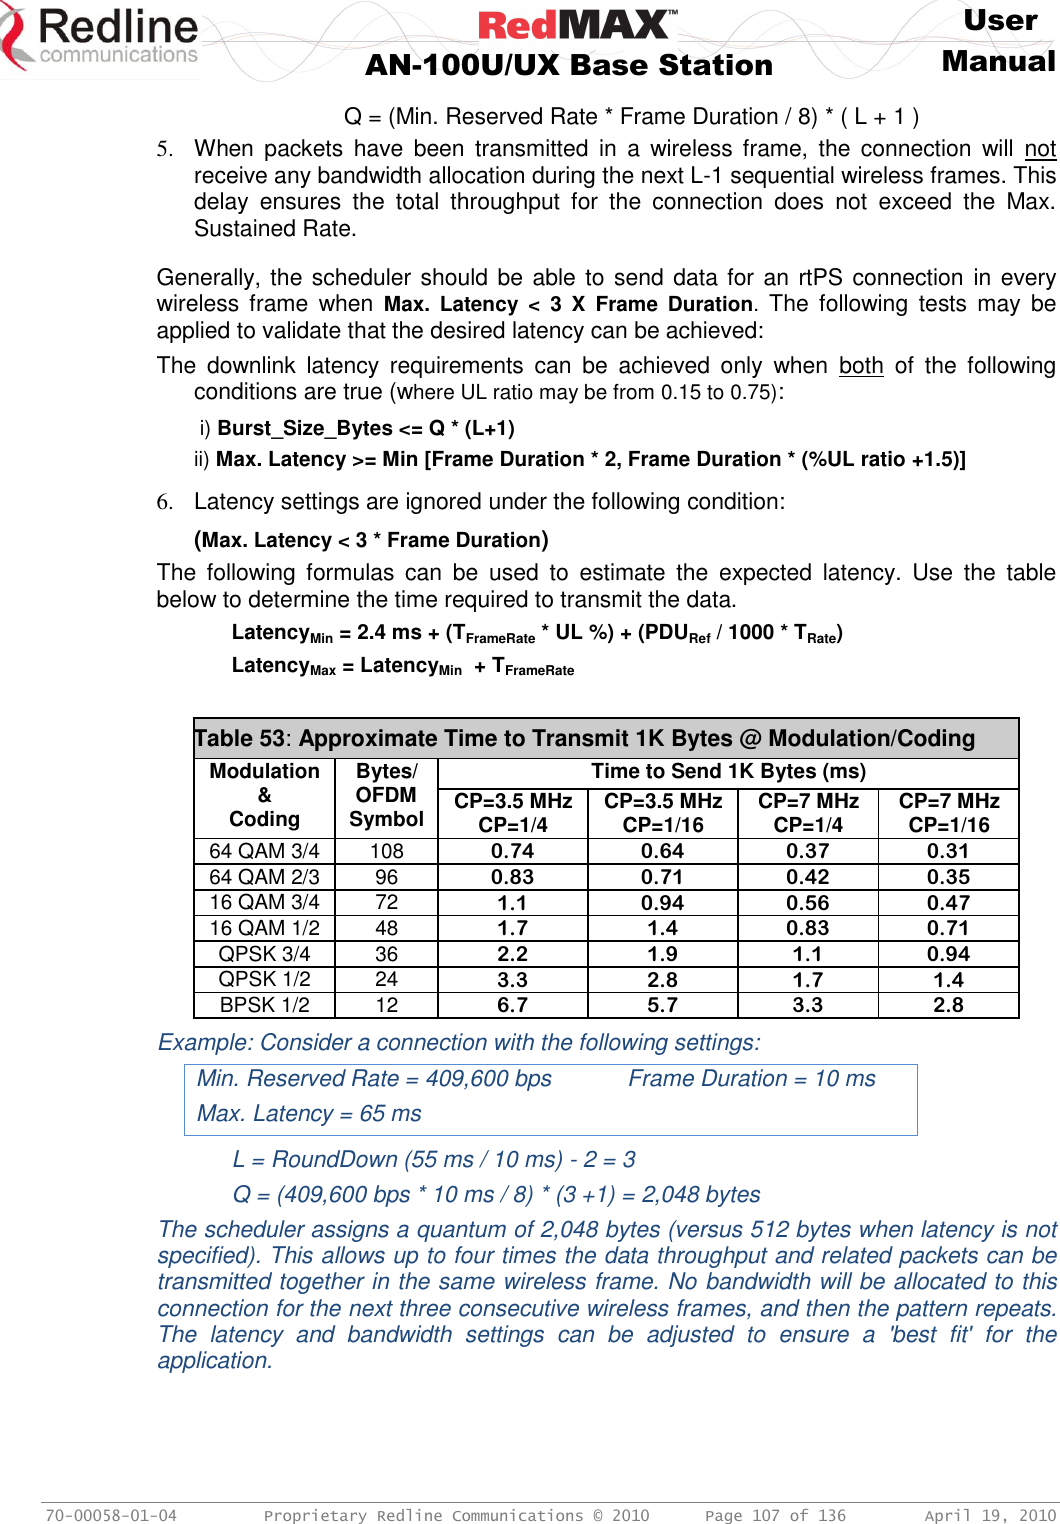     User  AN-100U/UX Base Station Manual   70-00058-01-04  Proprietary Redline Communications © 2010   Page 107 of 136  April 19, 2010   Q = (Min. Reserved Rate * Frame Duration / 8) * ( L + 1 ) 5.  When  packets  have  been  transmitted  in  a  wireless frame,  the  connection  will  not receive any bandwidth allocation during the next L-1 sequential wireless frames. This delay  ensures  the  total  throughput  for  the  connection  does  not  exceed  the  Max. Sustained Rate.  Generally, the scheduler should be able to send data for an rtPS connection in every wireless frame  when  Max.  Latency  &lt;  3  X  Frame  Duration.  The  following  tests  may  be applied to validate that the desired latency can be achieved: The  downlink  latency  requirements  can  be  achieved  only  when  both  of  the  following conditions are true (where UL ratio may be from 0.15 to 0.75):   i) Burst_Size_Bytes &lt;= Q * (L+1)  ii) Max. Latency &gt;= Min [Frame Duration * 2, Frame Duration * (%UL ratio +1.5)]  6.  Latency settings are ignored under the following condition: (Max. Latency &lt; 3 * Frame Duration) The  following  formulas  can  be  used  to  estimate  the  expected  latency.  Use  the  table below to determine the time required to transmit the data.   LatencyMin = 2.4 ms + (TFrameRate * UL %) + (PDURef / 1000 * TRate)    LatencyMax = LatencyMin  + TFrameRate    Table 53: Approximate Time to Transmit 1K Bytes @ Modulation/Coding Modulation &amp; Coding Bytes/ OFDM Symbol Time to Send 1K Bytes (ms) CP=3.5 MHz CP=1/4 CP=3.5 MHz CP=1/16 CP=7 MHz CP=1/4 CP=7 MHz CP=1/16 64 QAM 3/4 108 0.74 0.64 0.37 0.31 64 QAM 2/3 96 0.83 0.71 0.42 0.35 16 QAM 3/4 72 1.1 0.94 0.56 0.47 16 QAM 1/2 48 1.7 1.4 0.83 0.71 QPSK 3/4 36 2.2 1.9 1.1 0.94 QPSK 1/2 24 3.3 2.8 1.7 1.4 BPSK 1/2 12 6.7 5.7 3.3 2.8  Example: Consider a connection with the following settings: Min. Reserved Rate = 409,600 bps Frame Duration = 10 ms Max. Latency = 65 ms     L = RoundDown (55 ms / 10 ms) - 2 = 3   Q = (409,600 bps * 10 ms / 8) * (3 +1) = 2,048 bytes The scheduler assigns a quantum of 2,048 bytes (versus 512 bytes when latency is not specified). This allows up to four times the data throughput and related packets can be transmitted together in the same wireless frame. No bandwidth will be allocated to this connection for the next three consecutive wireless frames, and then the pattern repeats. The  latency  and  bandwidth  settings  can  be  adjusted  to  ensure  a  &apos;best  fit&apos;  for  the application.  